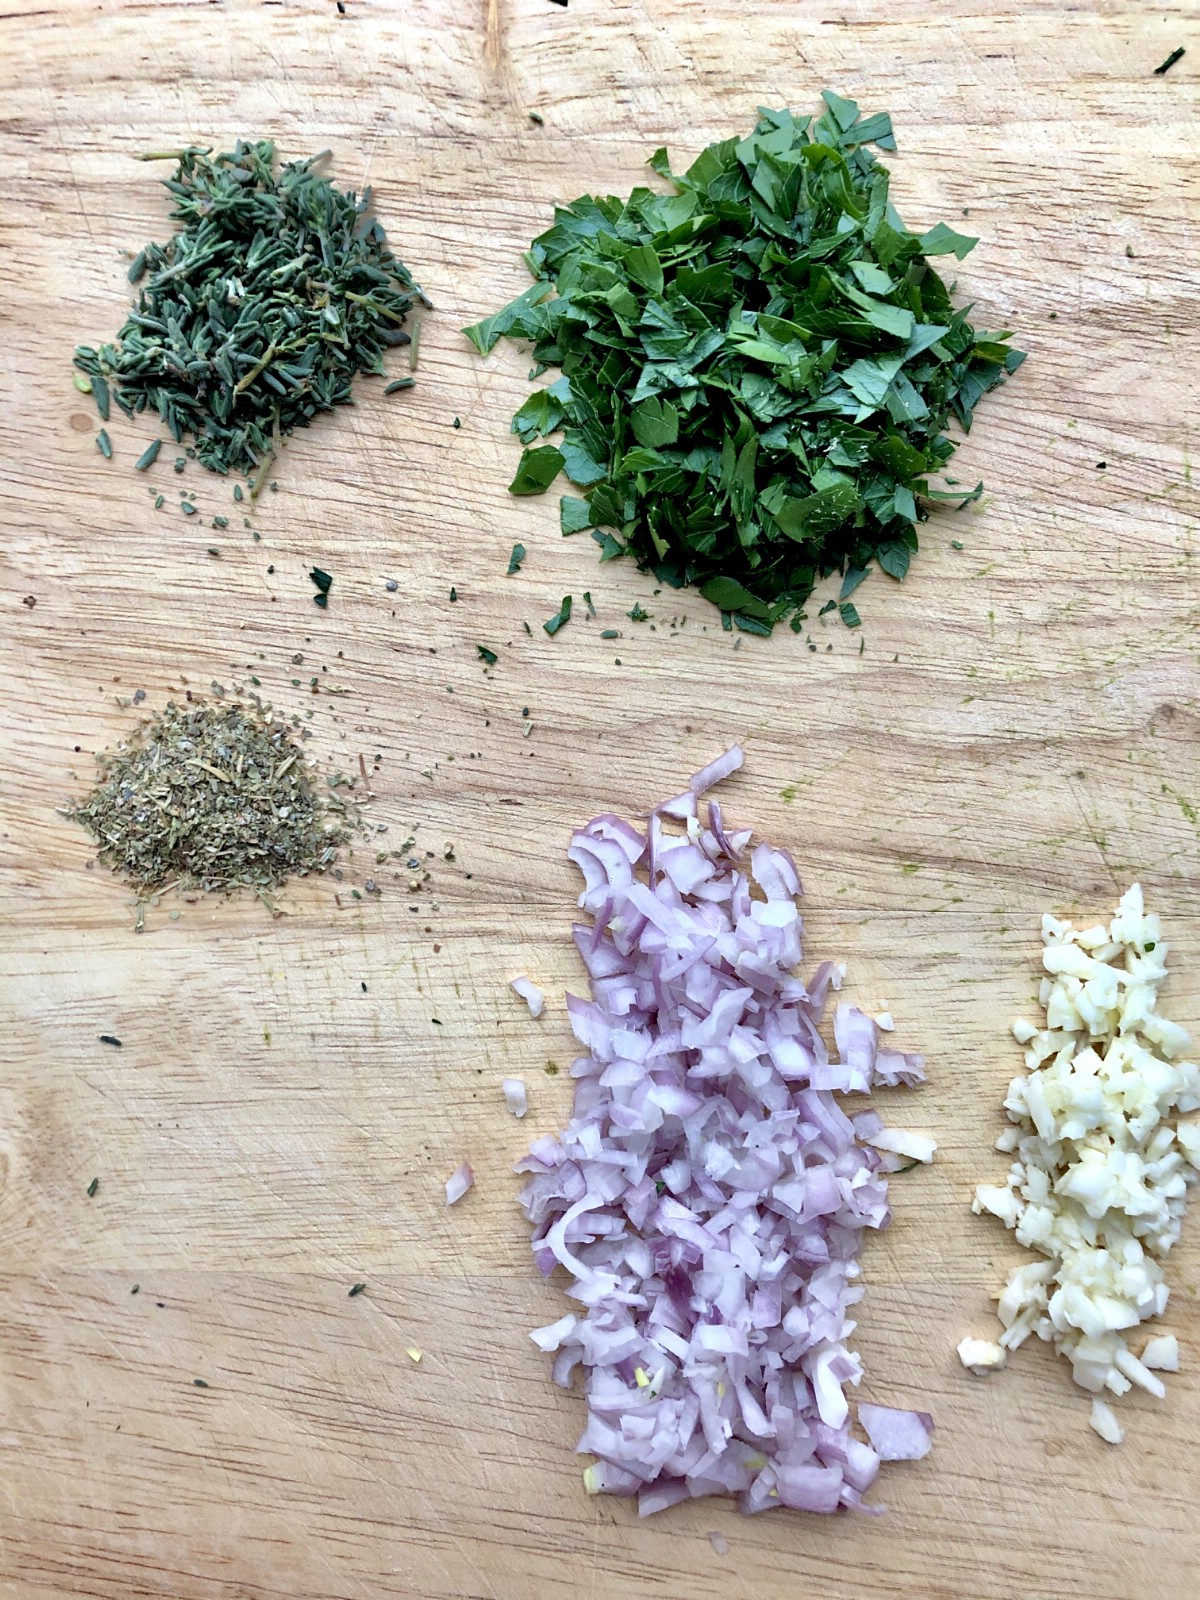 Spices on cutting board